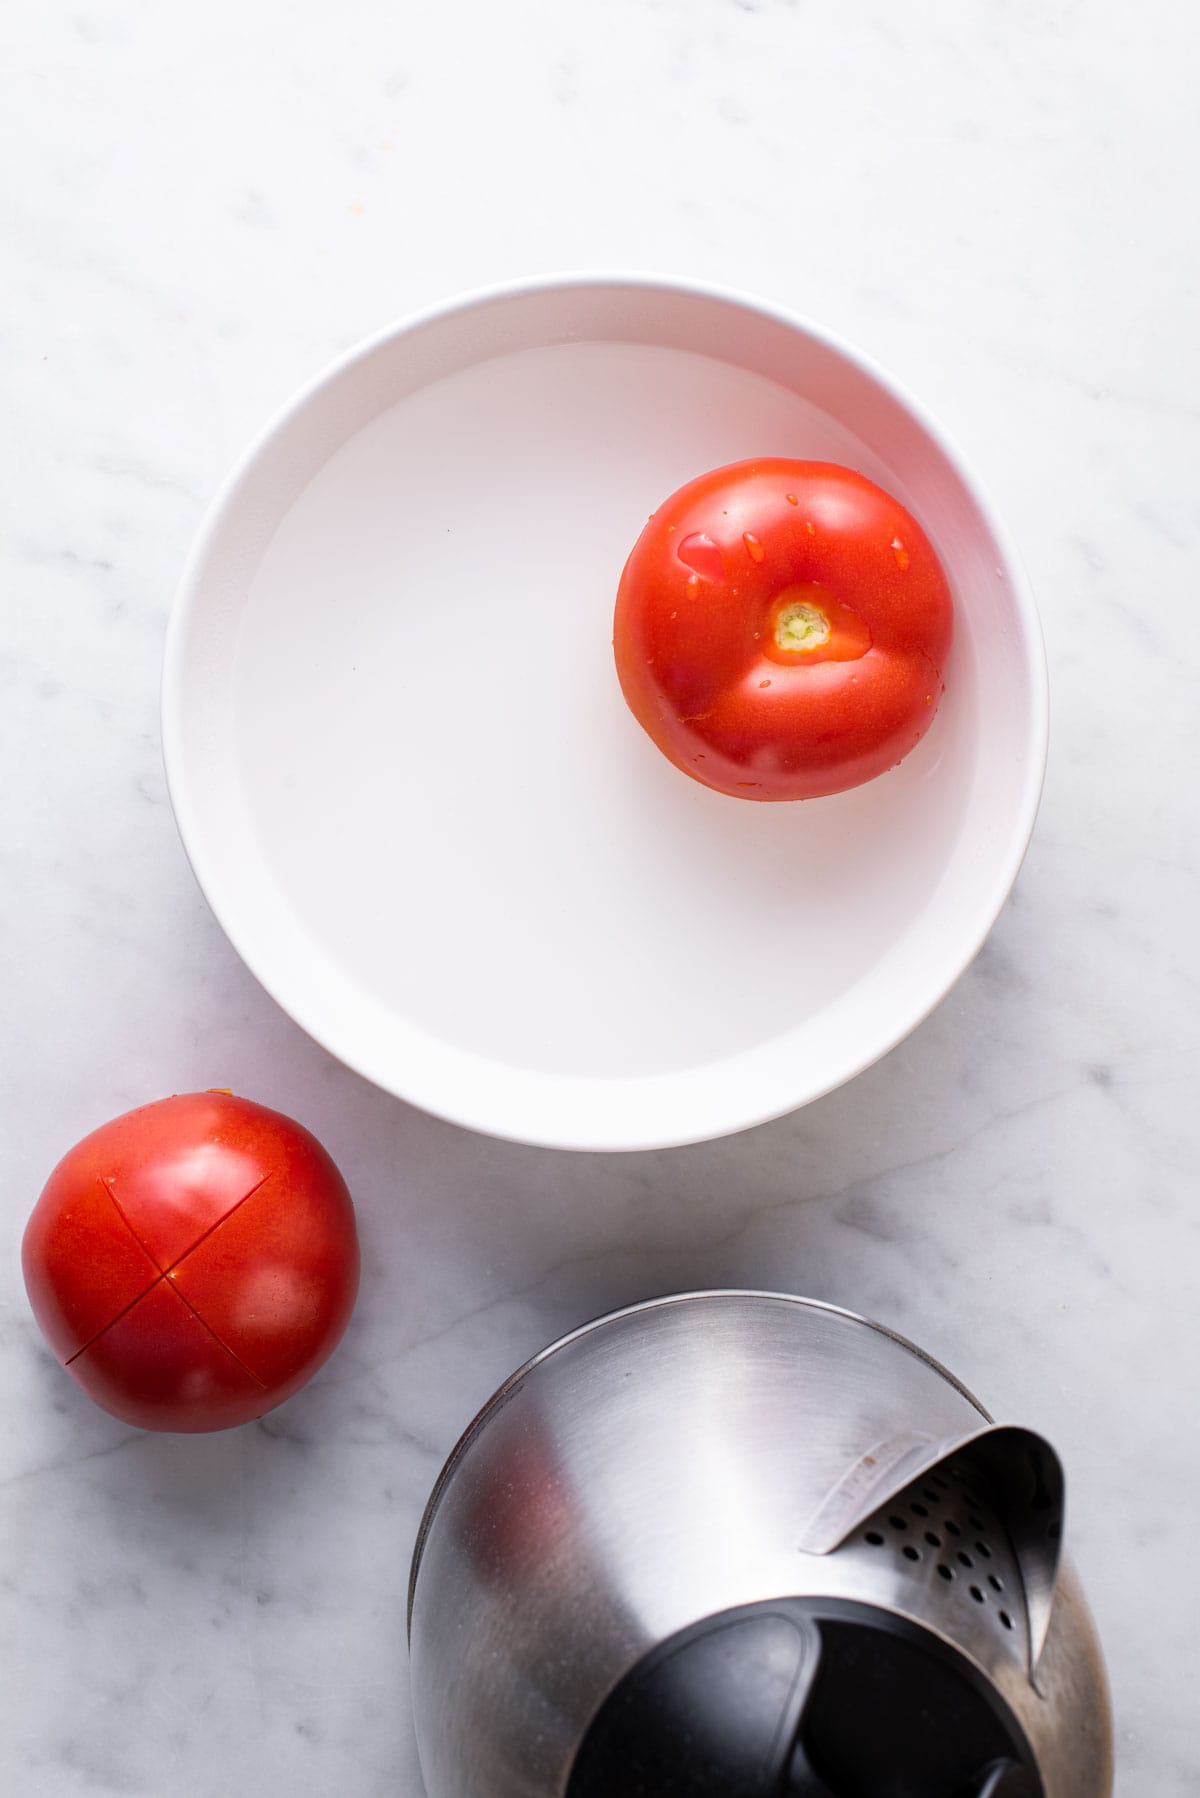 Vine tomatoes in a bowl of water next to a kettle.